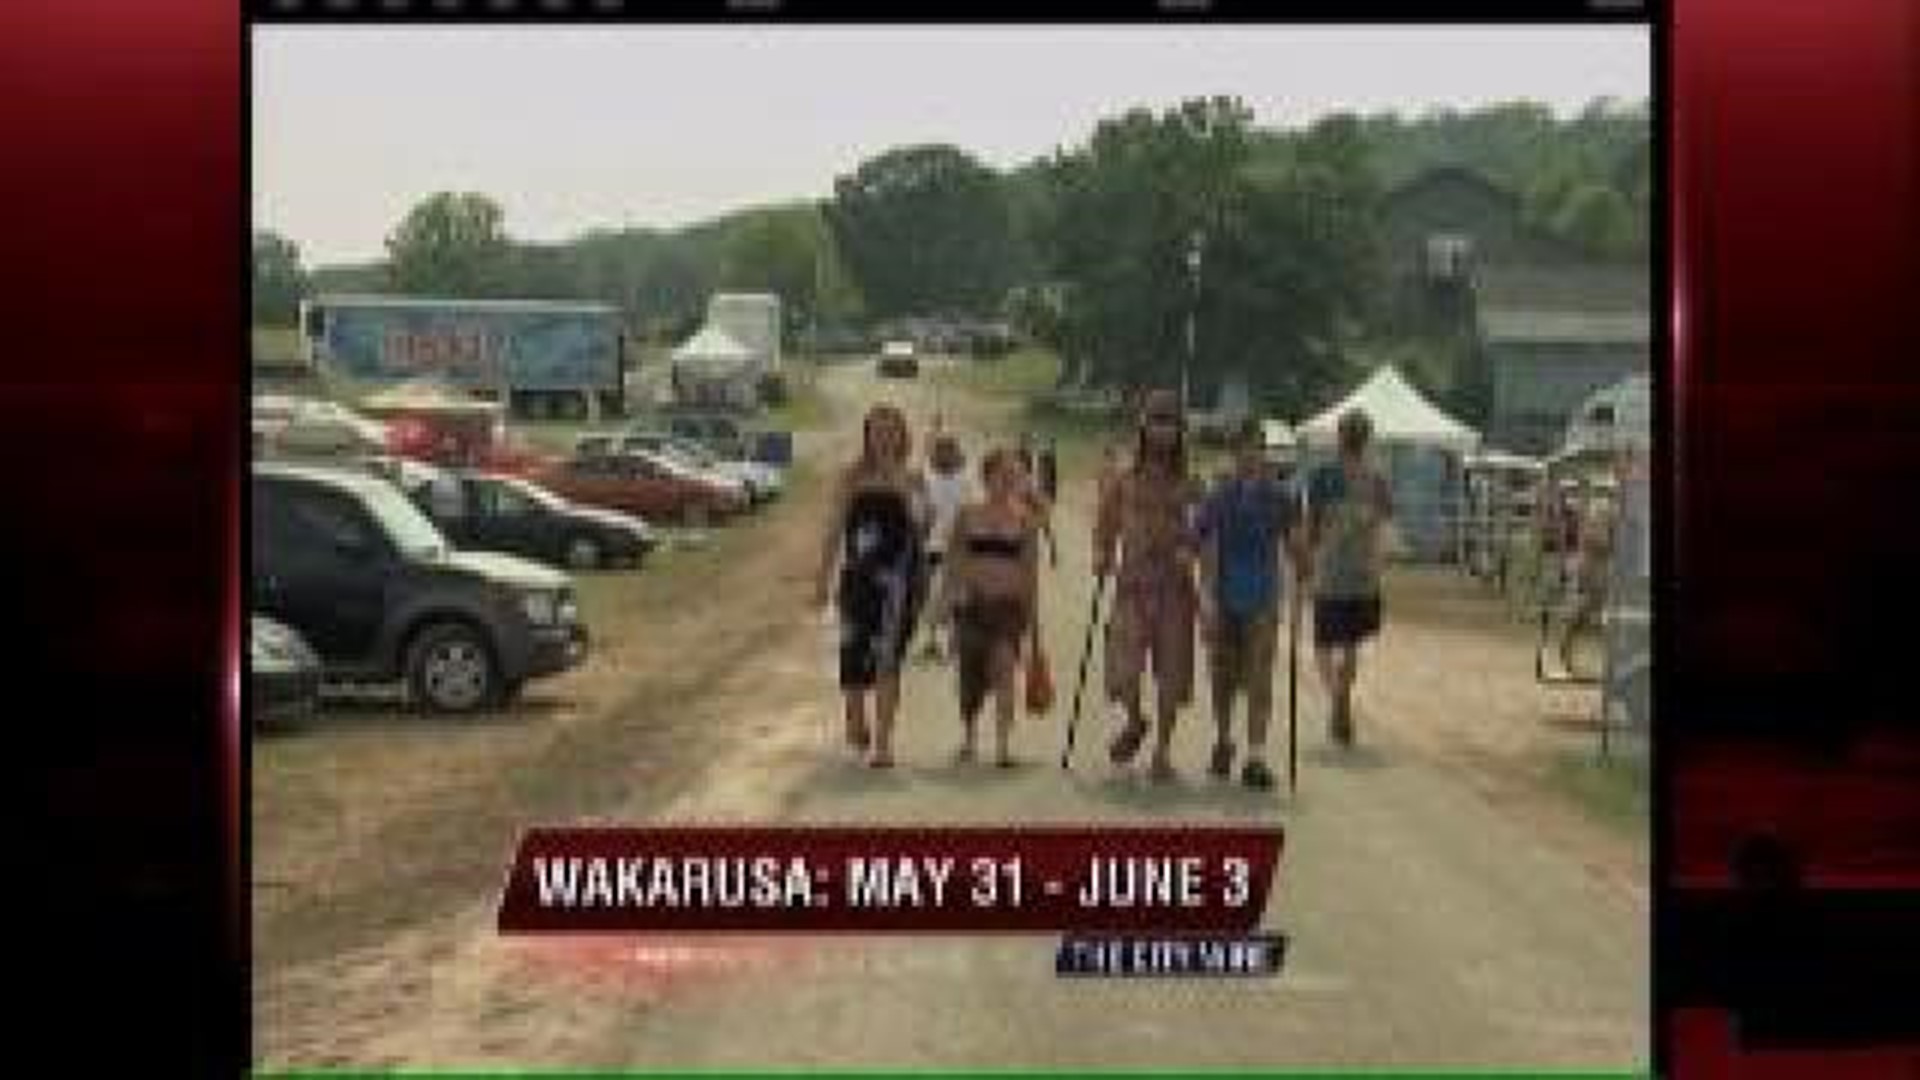 Wakarusa Puts Area on Musical Map